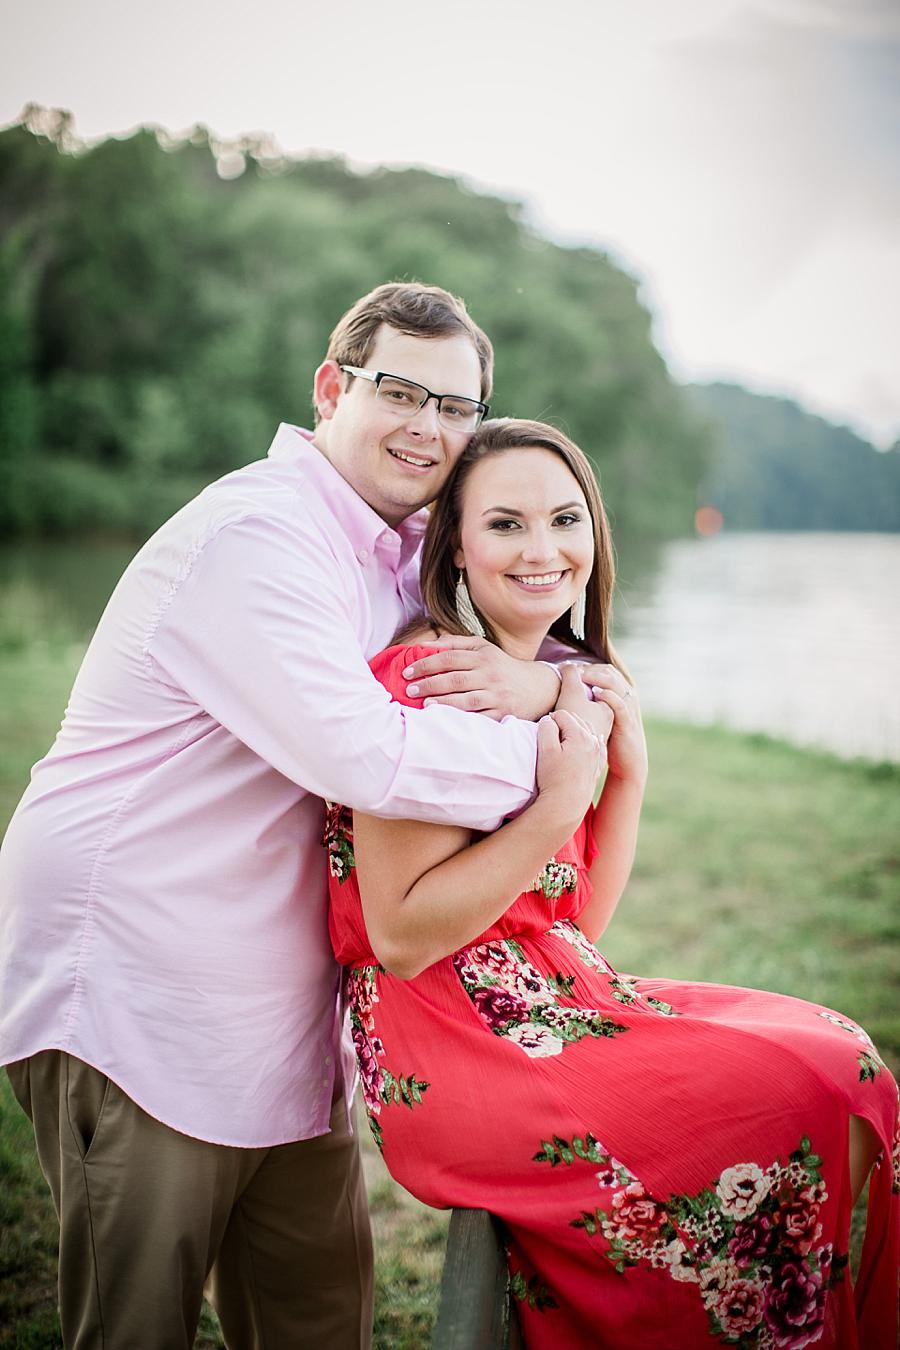 Hug from behind at this Whitestone Country Inn Engagement Session by Knoxville Wedding Photographer, Amanda May Photos.